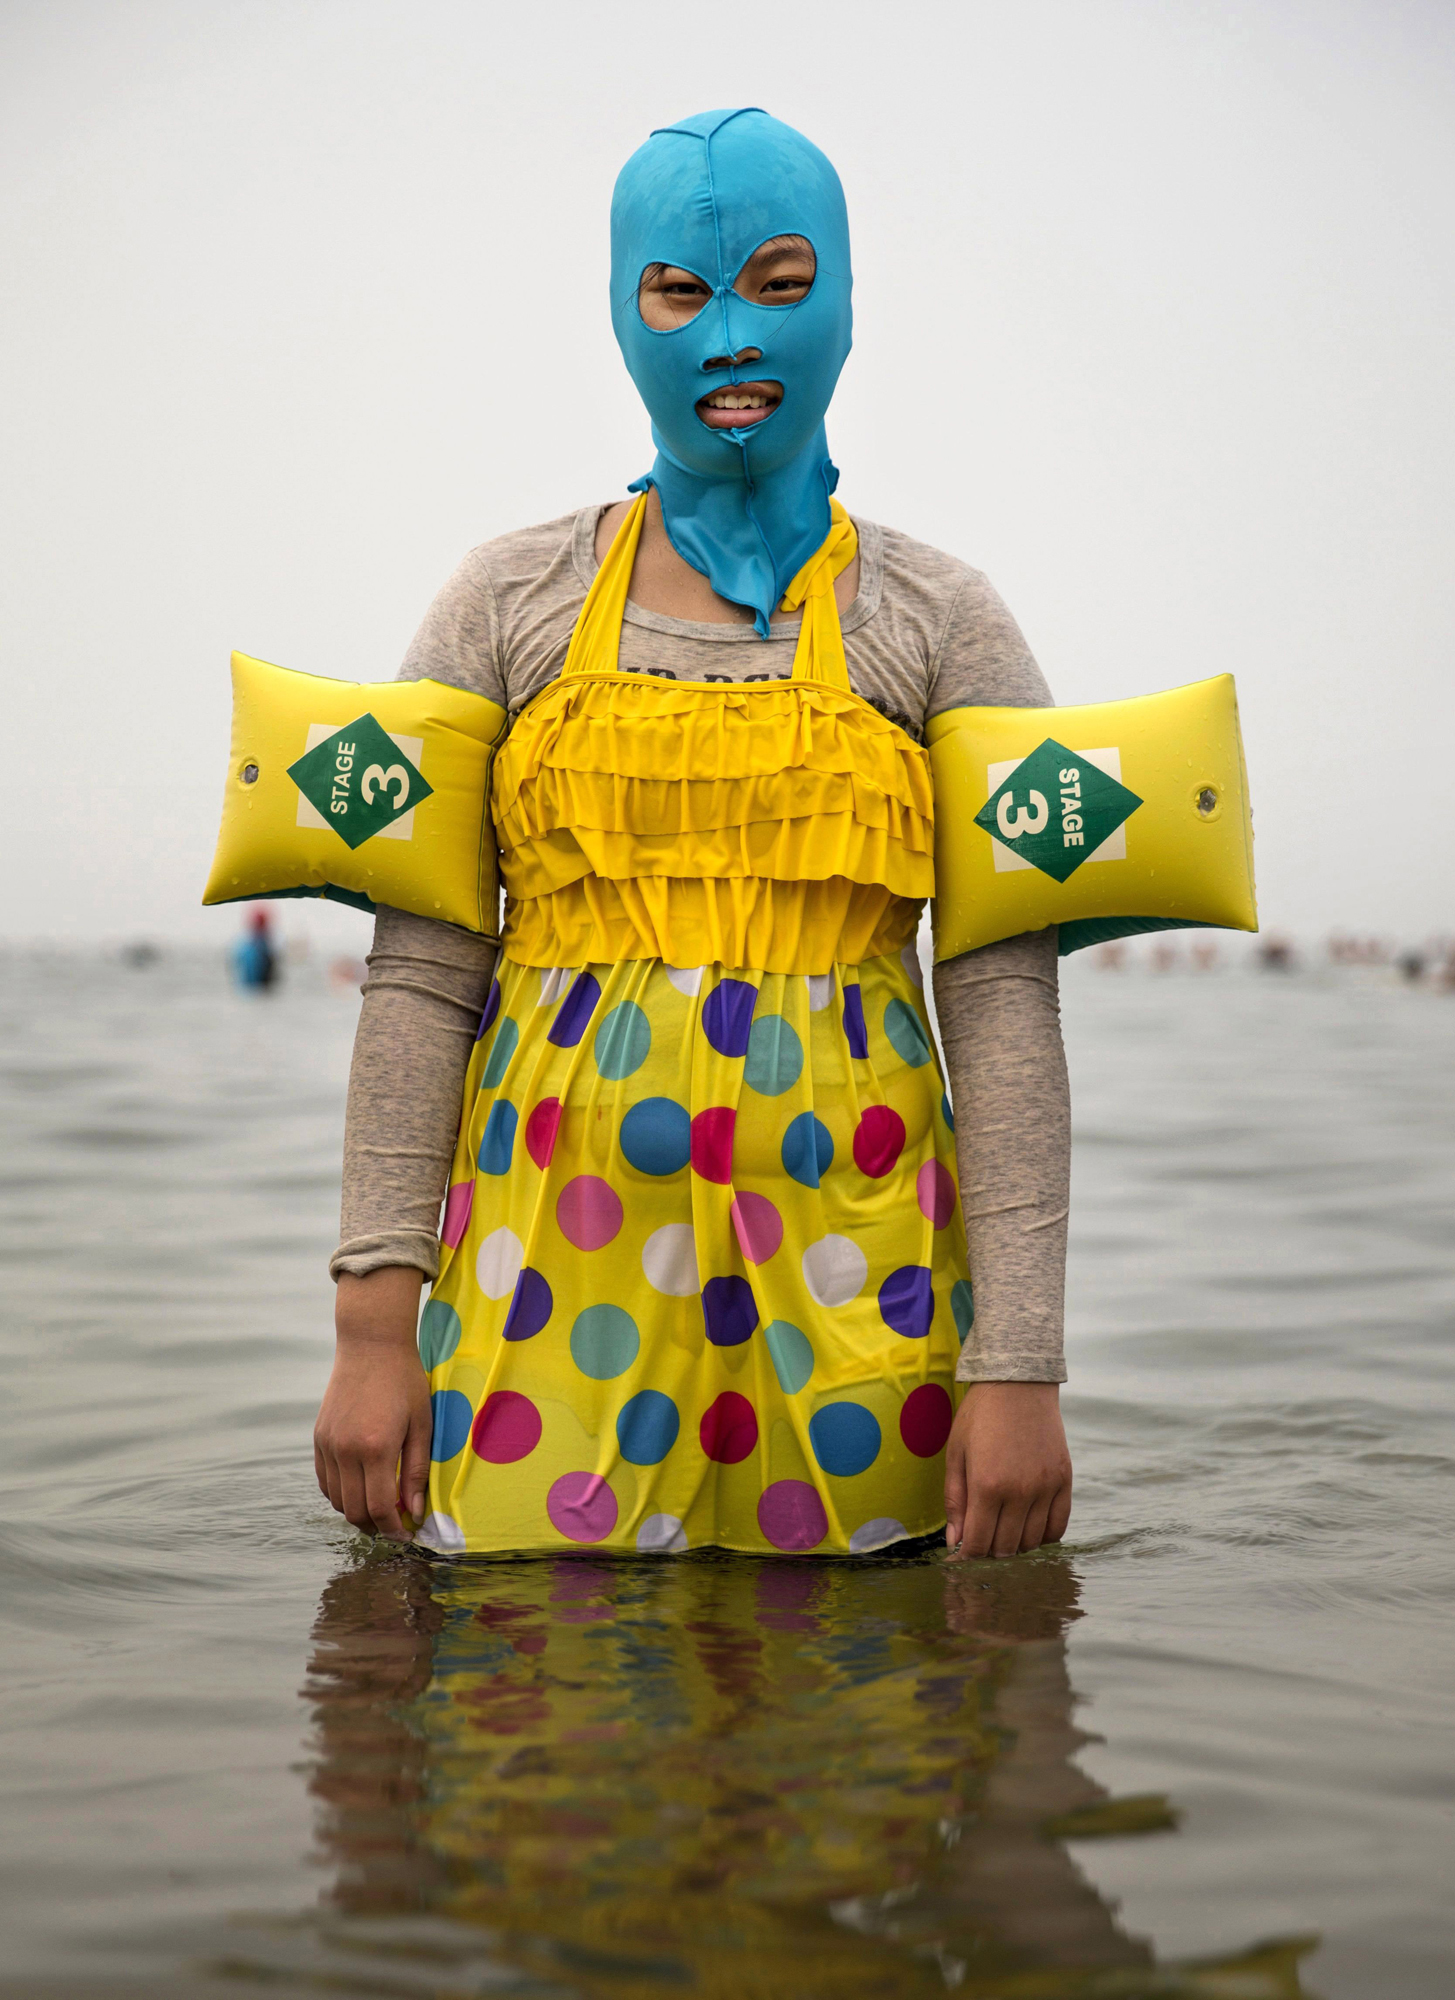 A Chinese woman wears a face-kini as she poses on Aug. 21, 2014 in the Yellow Sea in Qingdao.